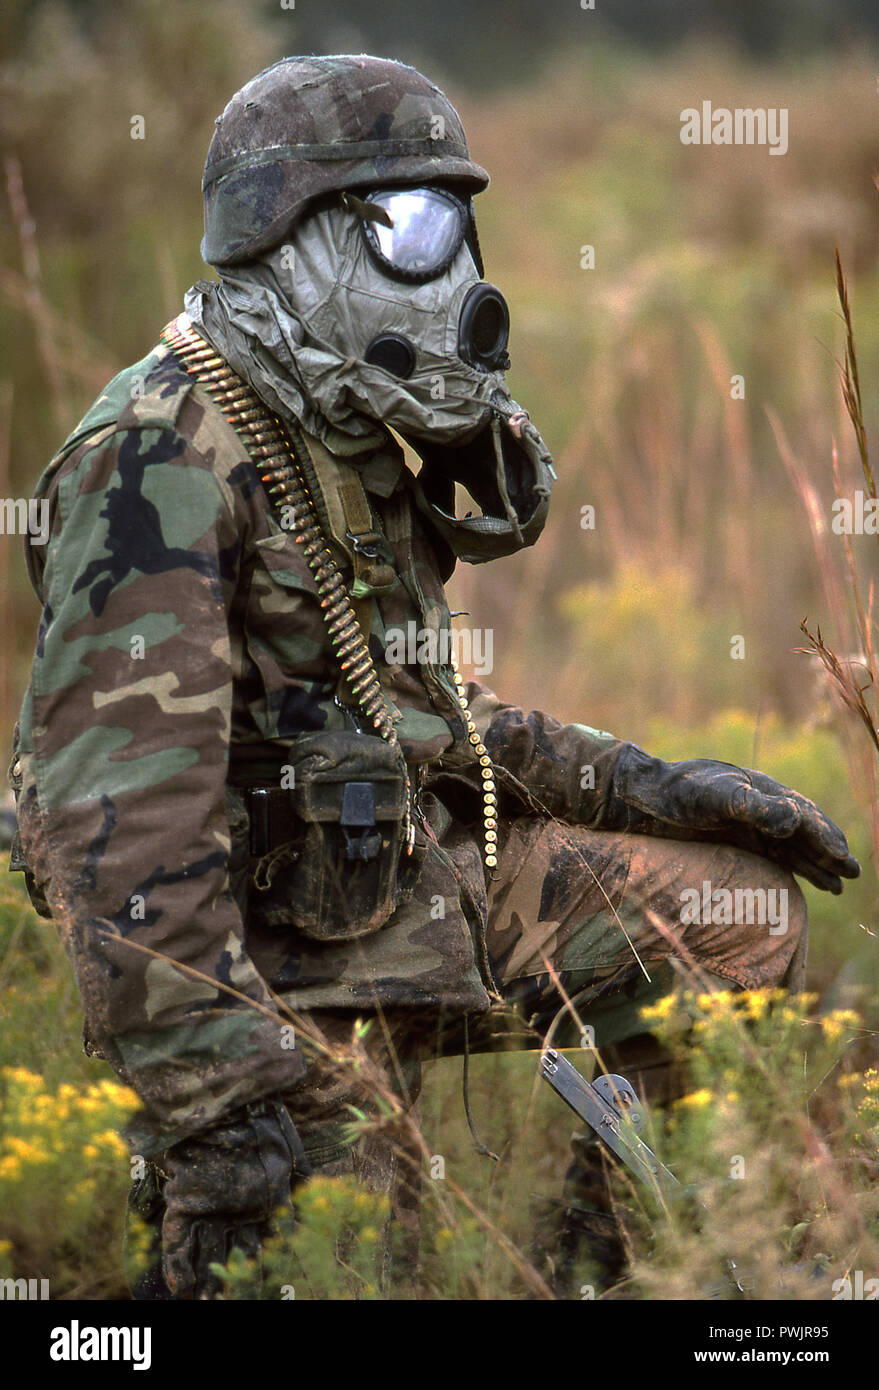 Soldier in gas mask, Combat protection Stock Photo